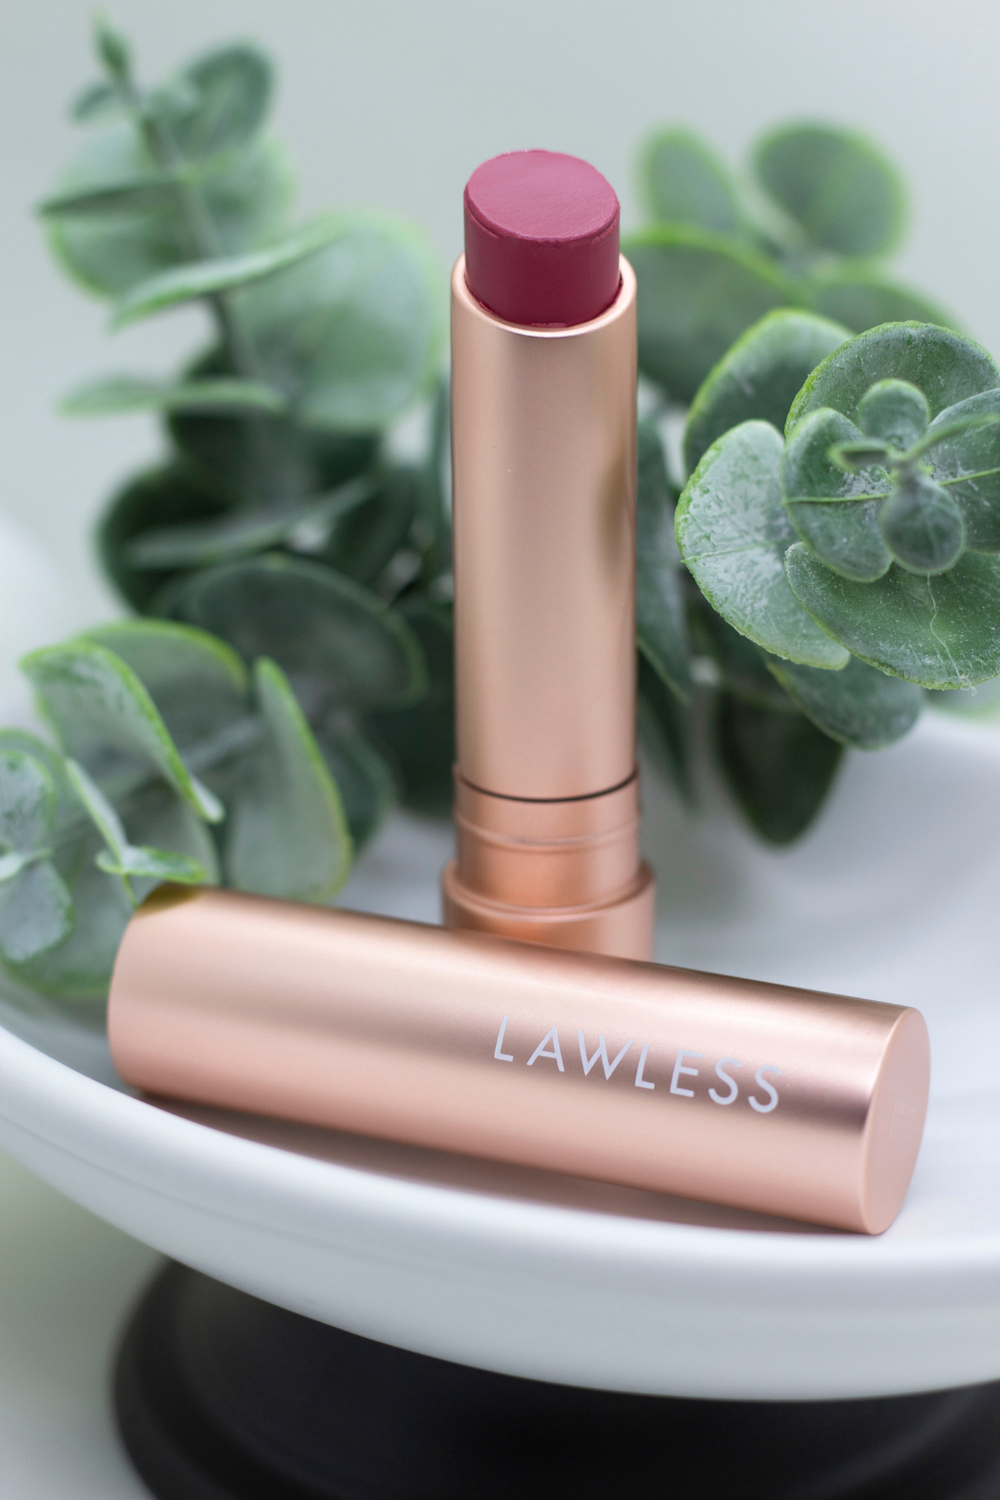 Lawless Forget the Filler Lip-Plumping Tinted Lip Balm Stick in Posey Shade - Product Image with Cap.